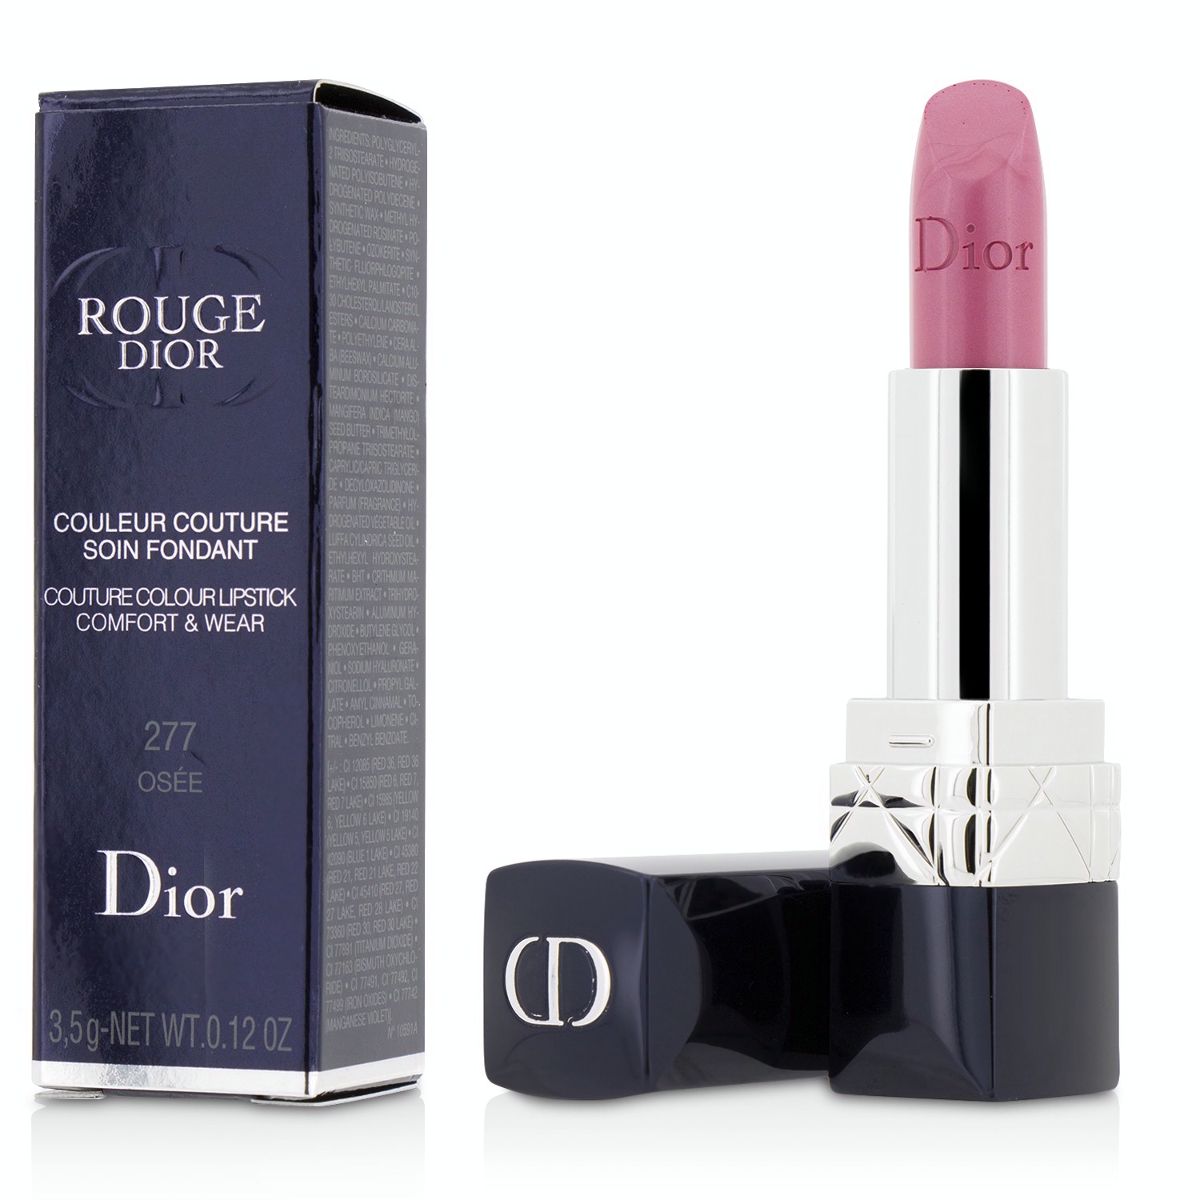 Rouge Dior Couture Colour Comfort  Wear Lipstick - # 277 Osee Christian Dior Image